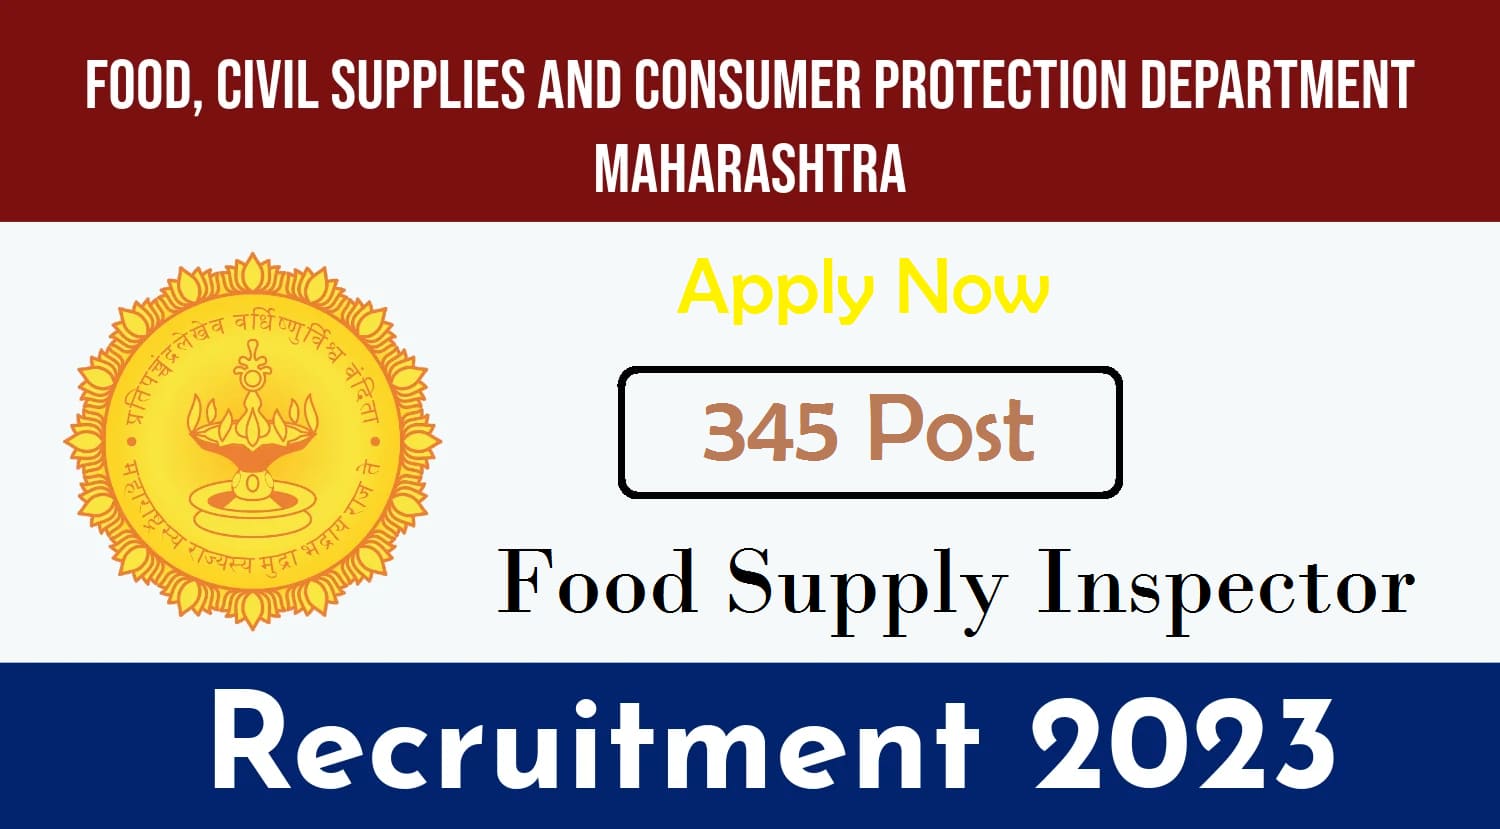 Food Supply Inspector Recruitment 2023 for 345 Posts, Eligibility, Salary & Age limit